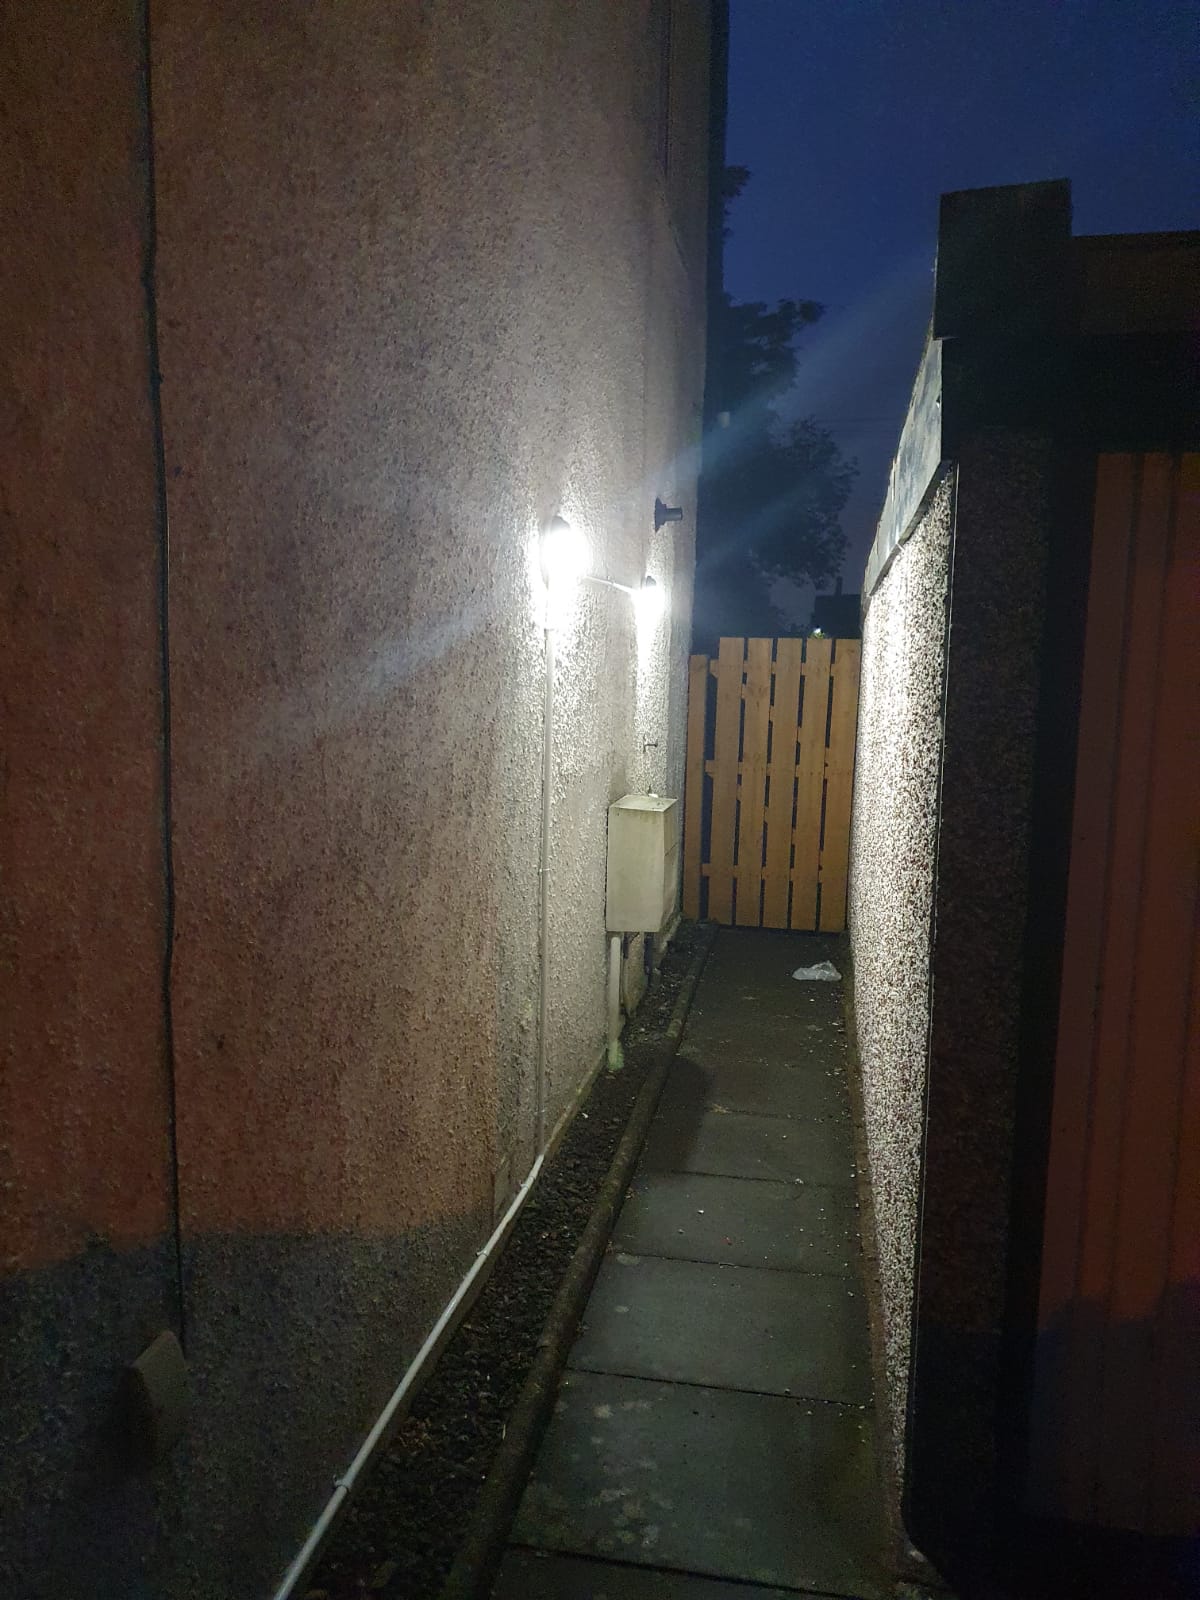 Customer complained the pathway was too dark and wanted it to be illuminated